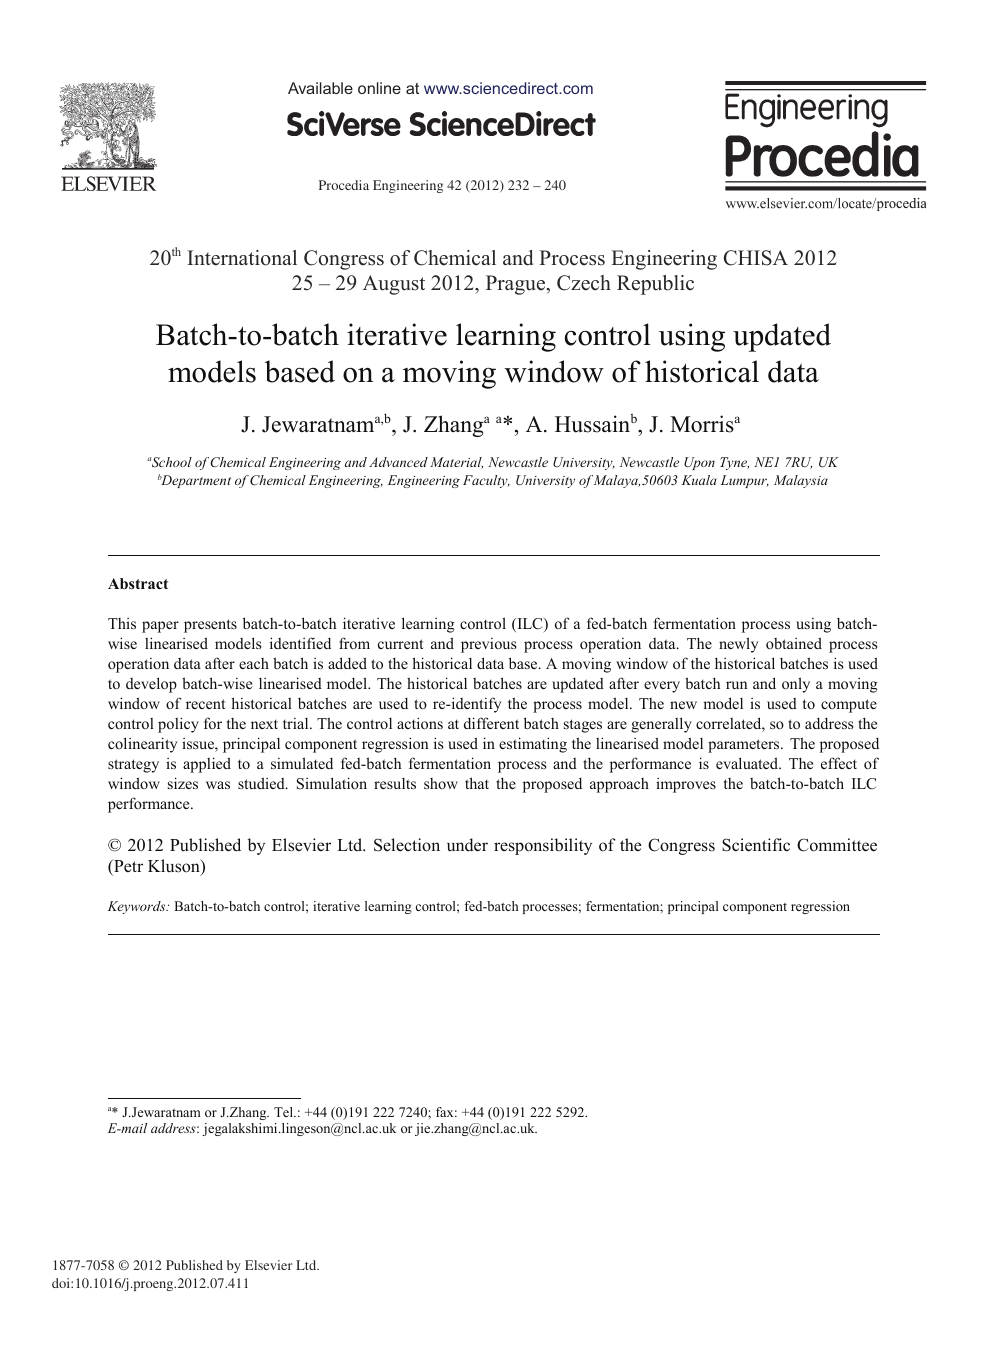 Batch To Batch Iterative Learning Control Using Updated Models Based On A Moving Window Of Historical Data Topic Of Research Paper In Chemical Engineering Download Scholarly Article Pdf And Read For Free On